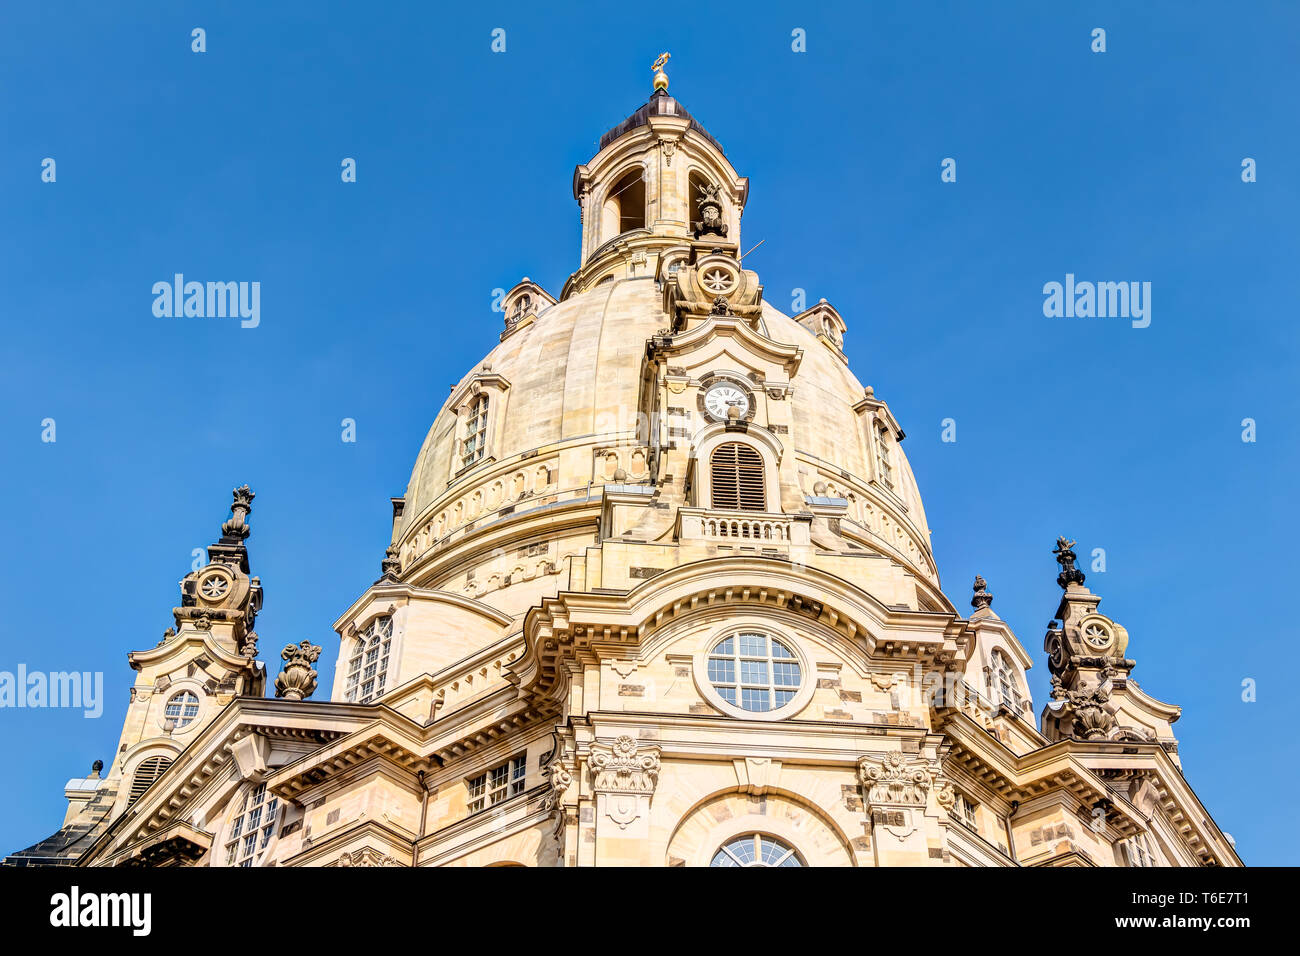 The famous Church of Our Lady, Dresden, Germany Stock Photo